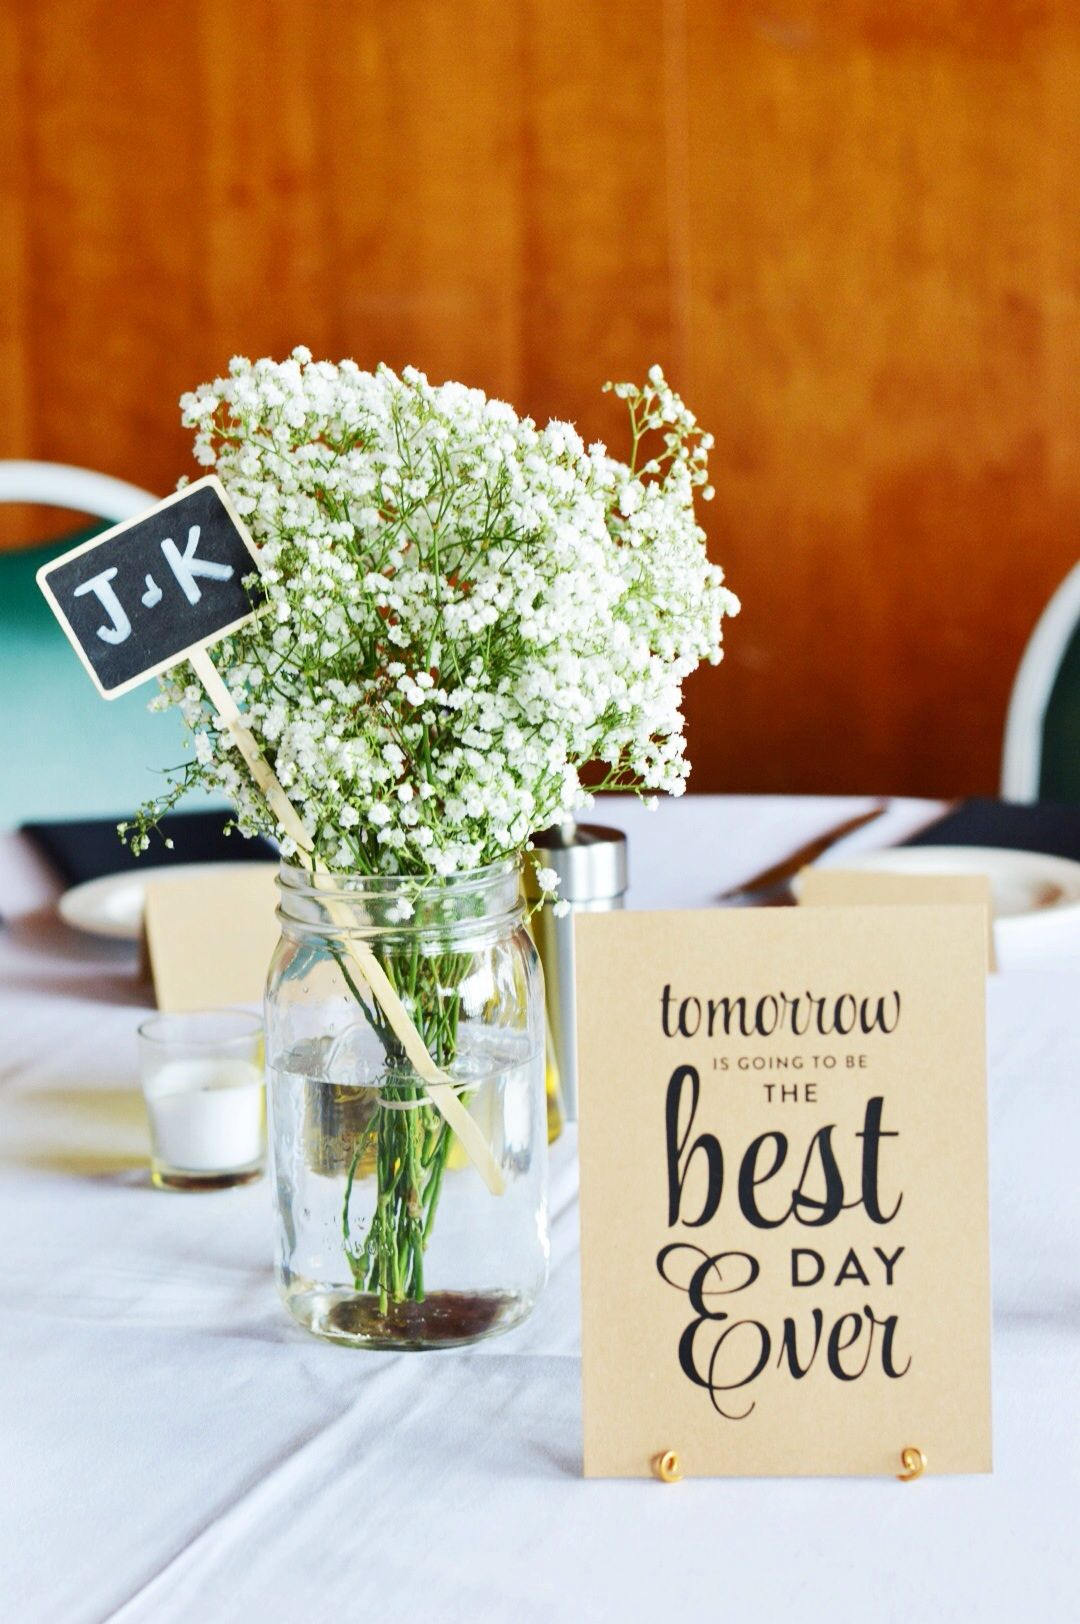 10 Awesome Rehearsal Dinner Table Decorations Ideas rehearsal dinner decor barn wedding rehearsal dinner decorations 2022